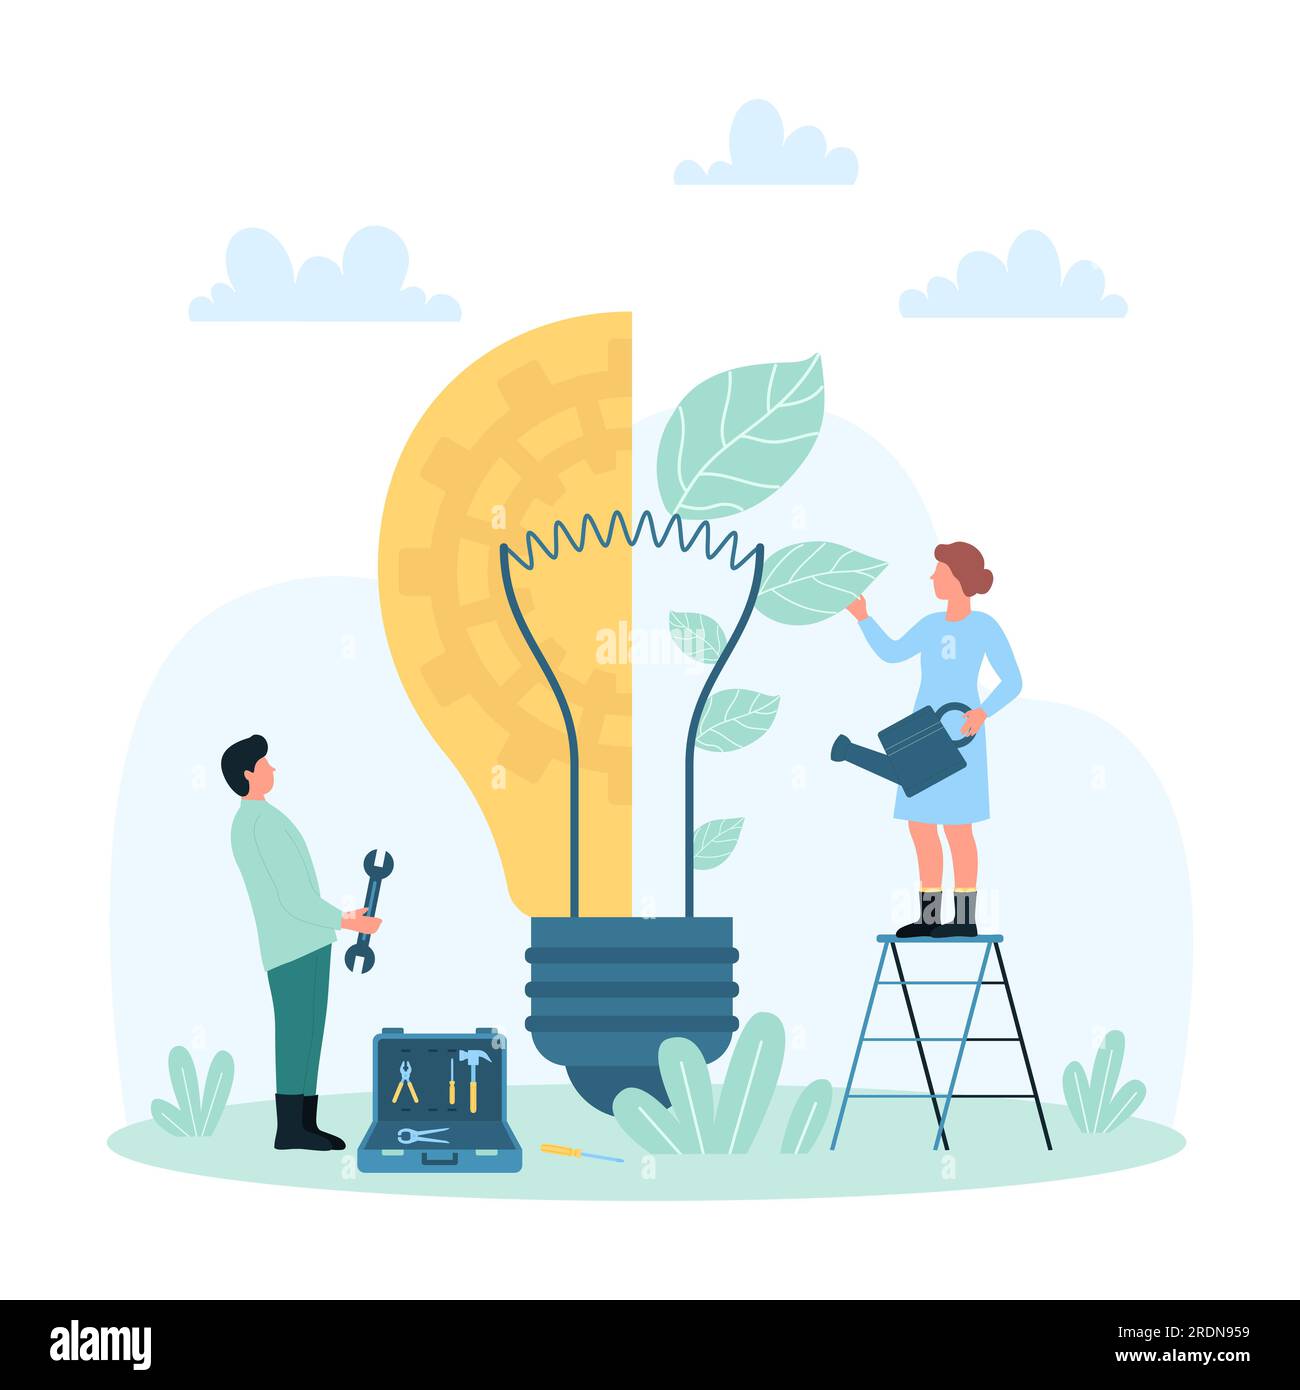 Development, growth of global eco projects vector illustration. Cartoon ...